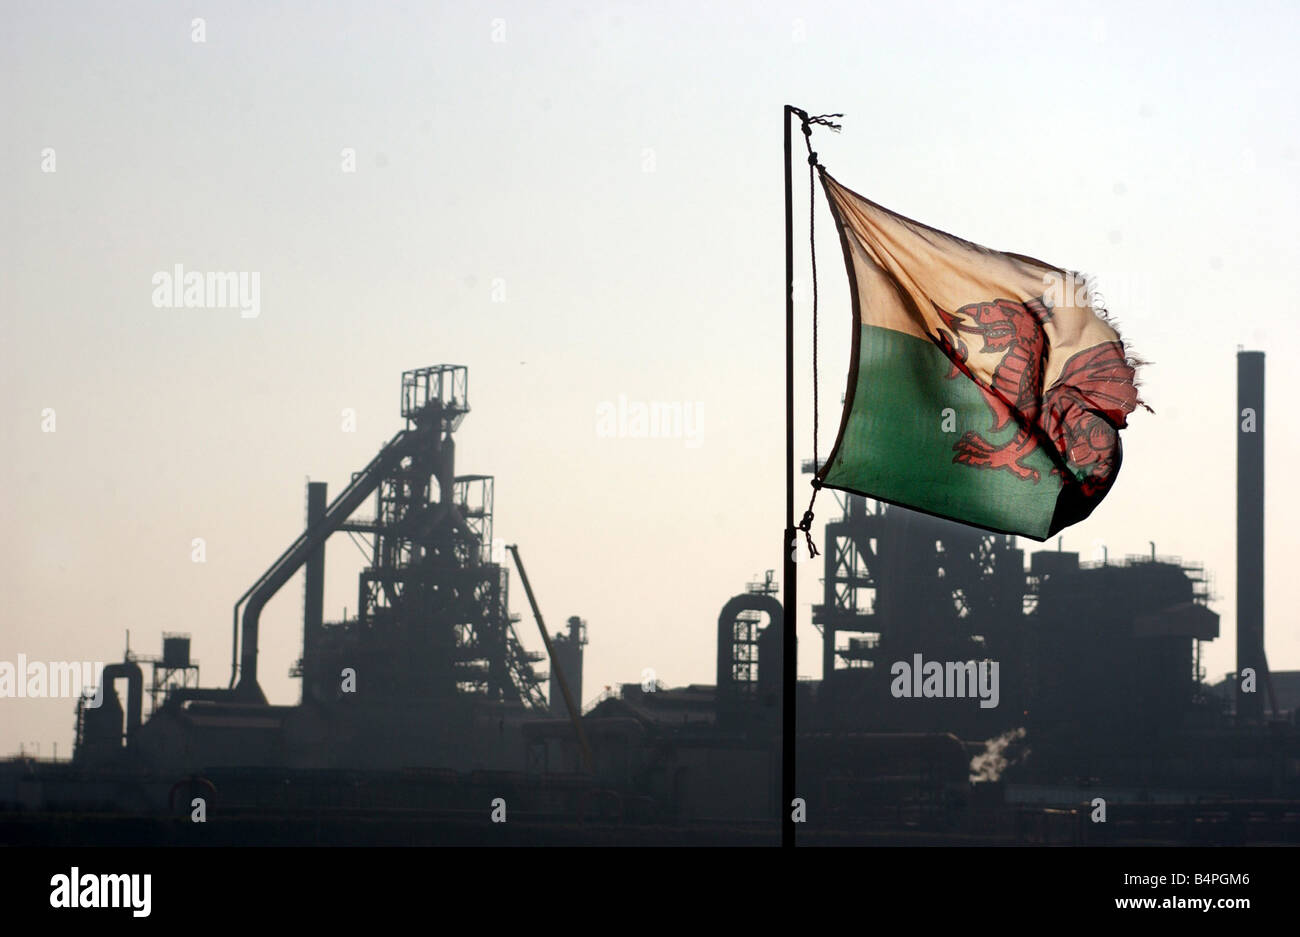 A new coke furnace has been earmarked for Corus Port Talbot Picture shows a Welsh flag flying over the works 30th March 2004 Stock Photo